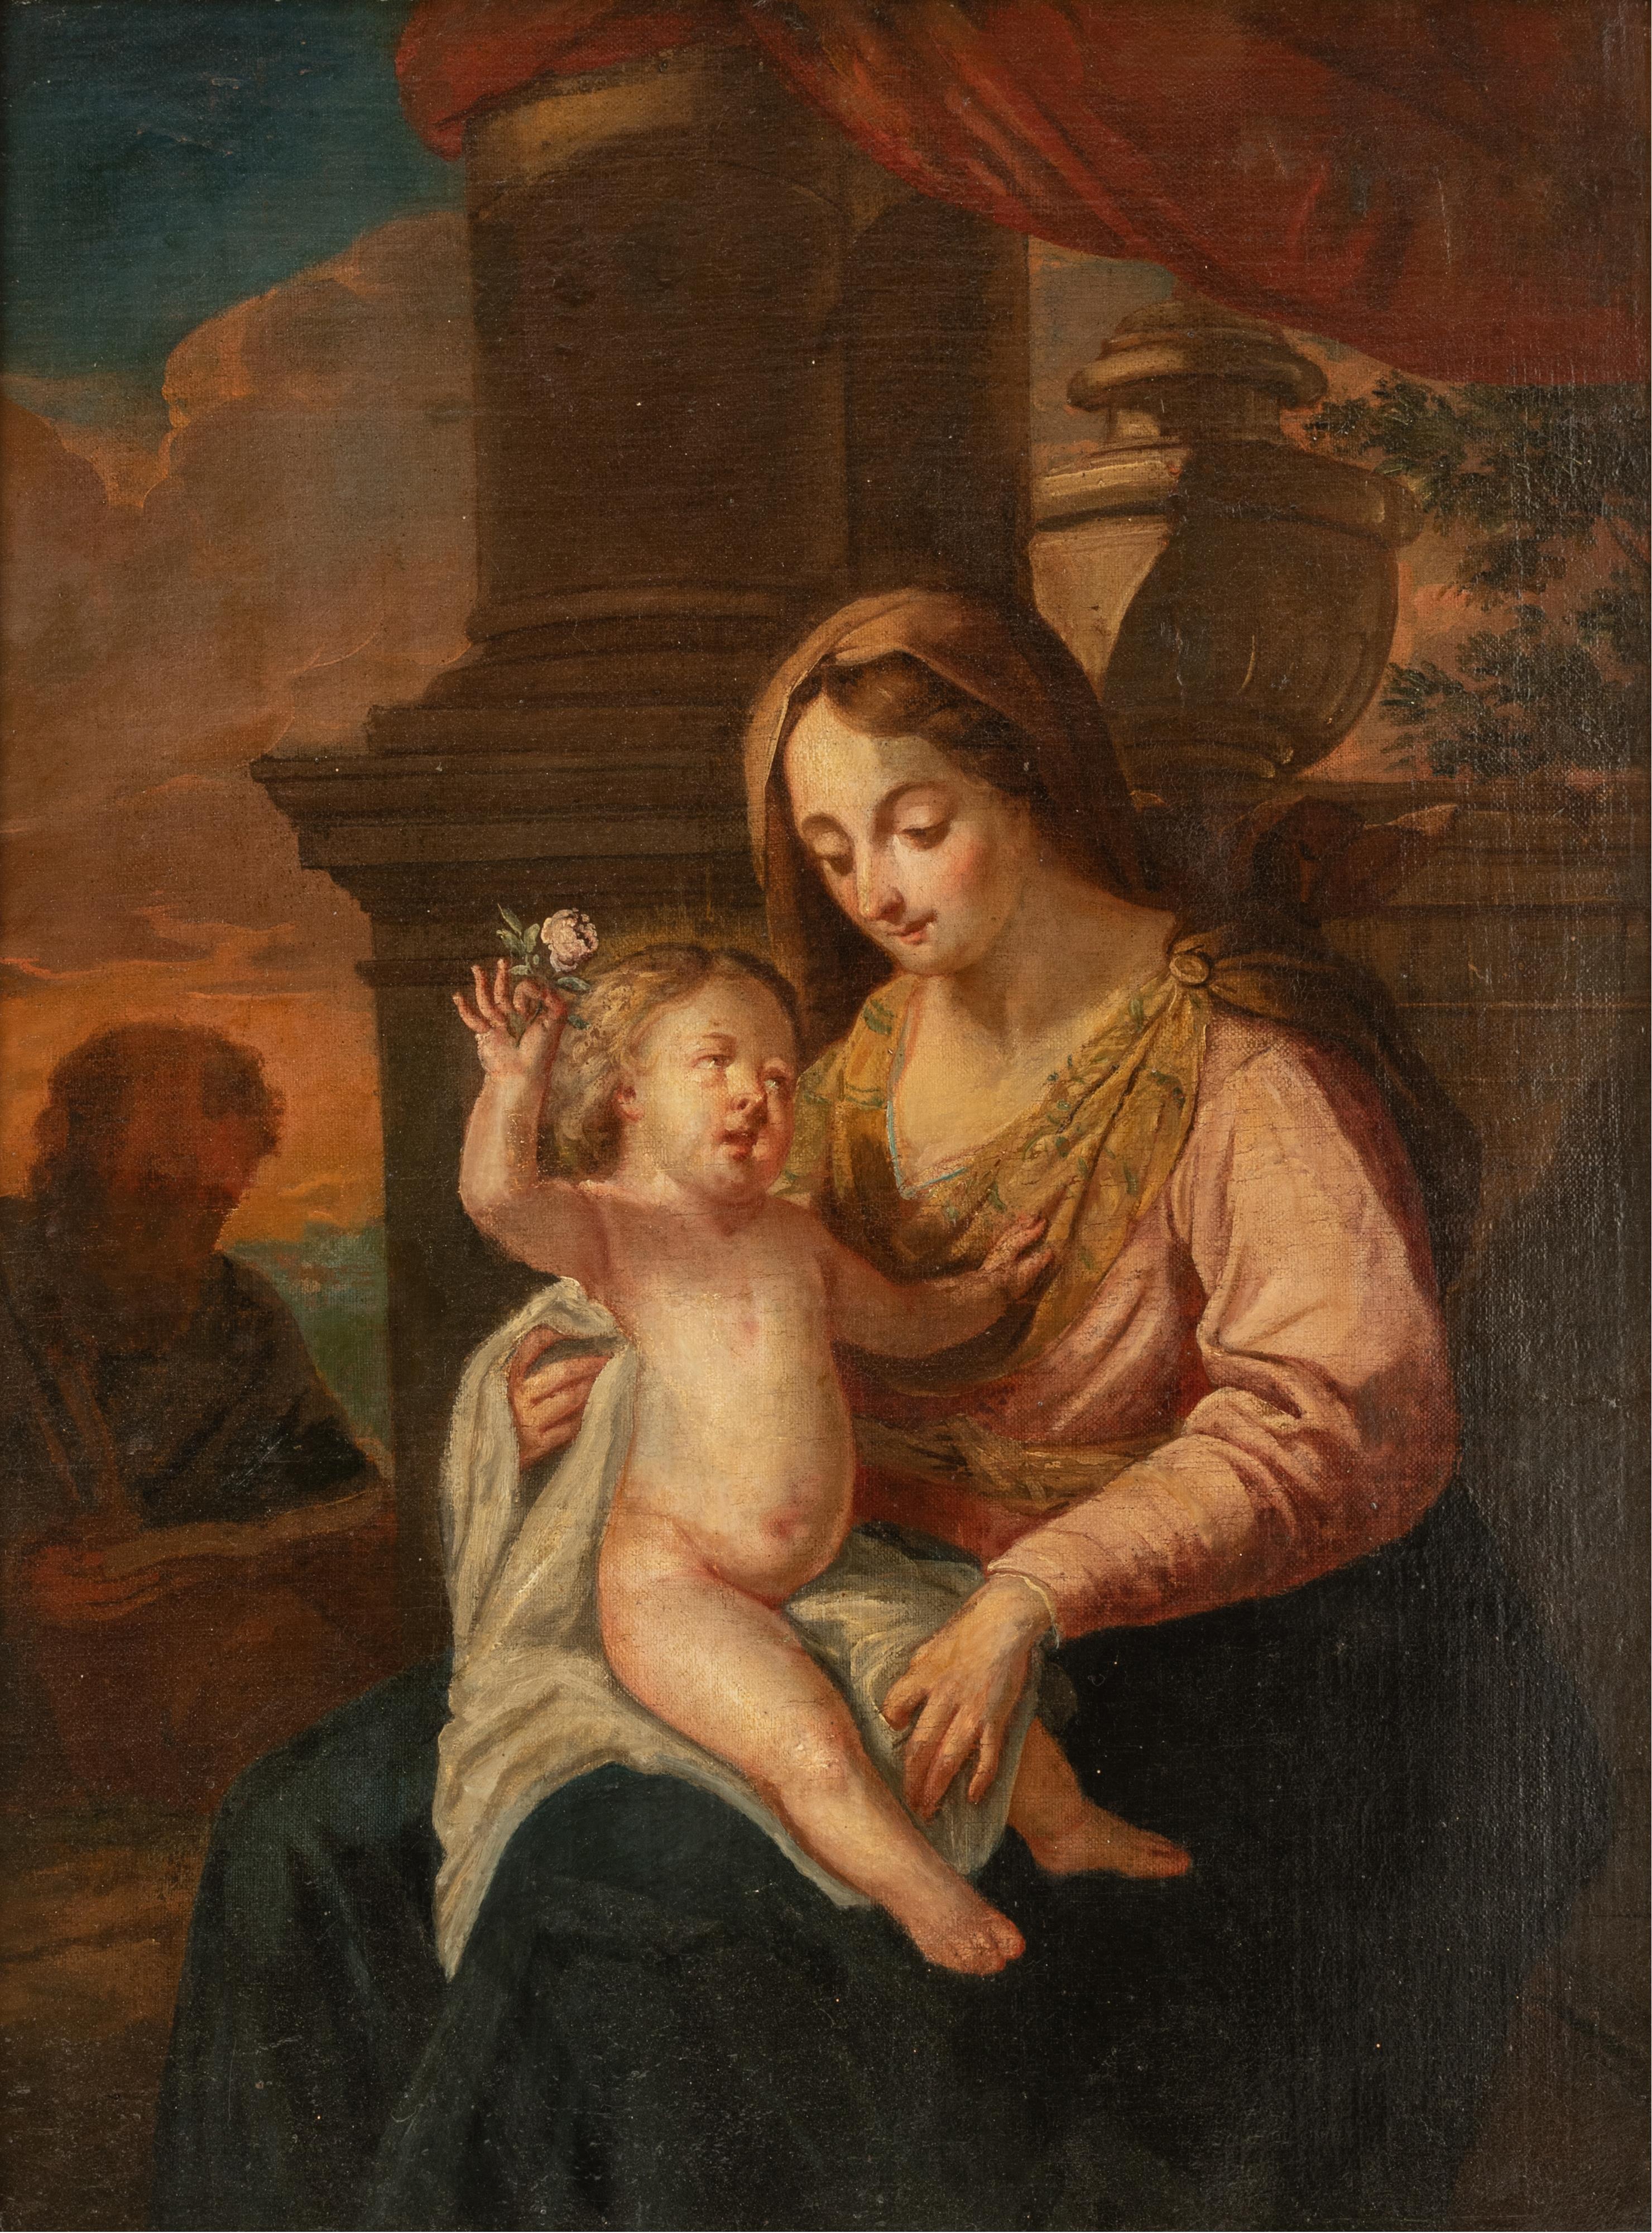 No visible signature, the Madonna holding the Holy Child, accompanied by an Evangelist in the backgr